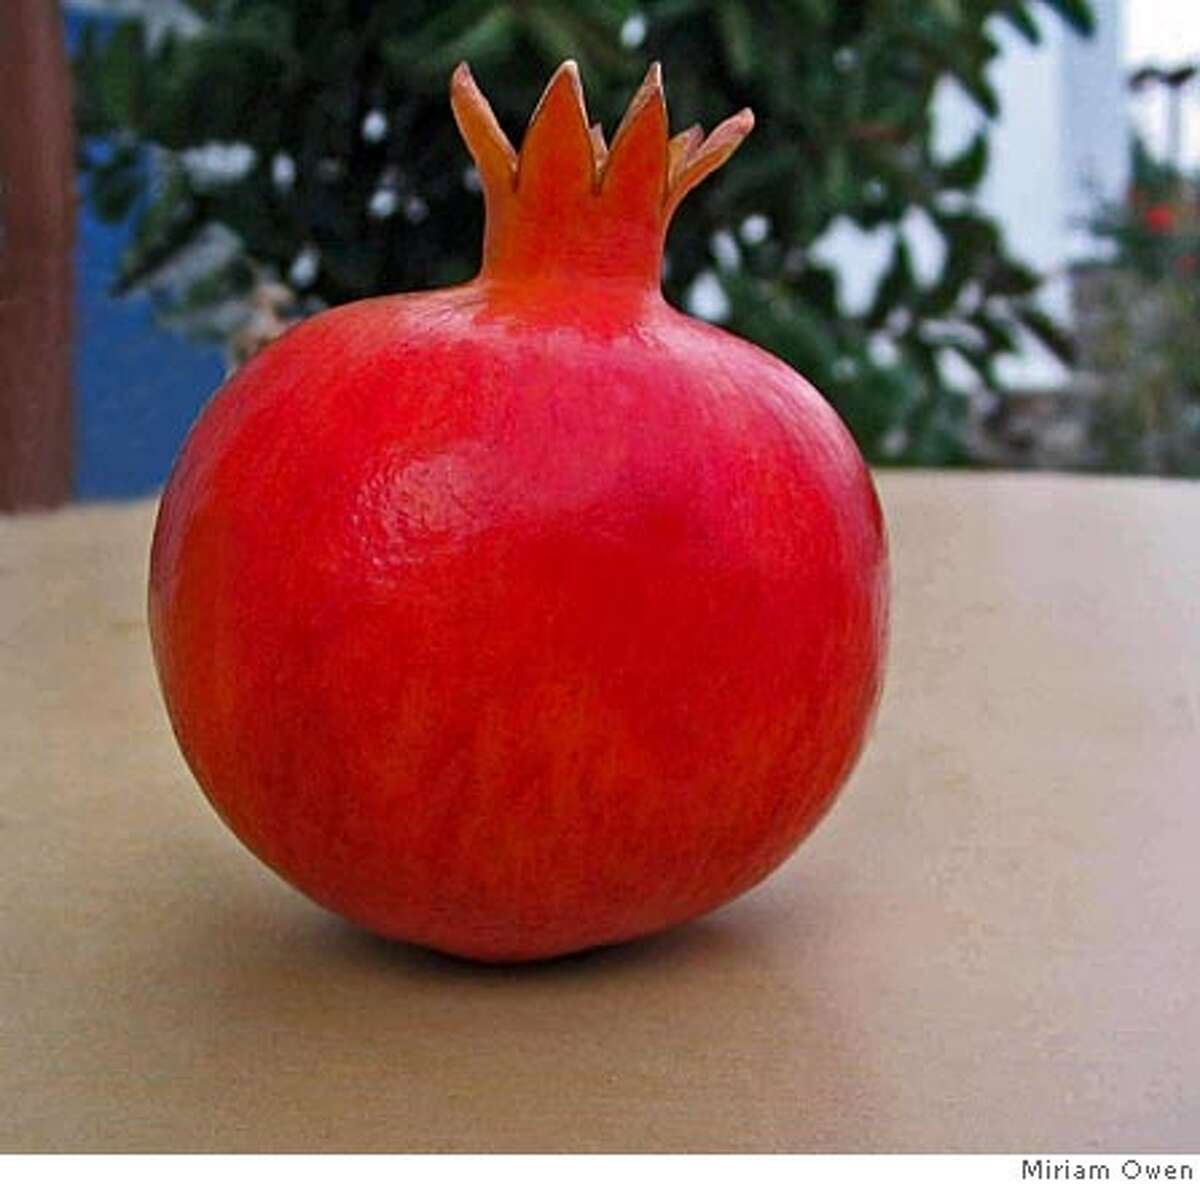 Pomegranate, the seed-filled fruit that, in Greek mythology, was the source of winter. Credit: Miriam Owen